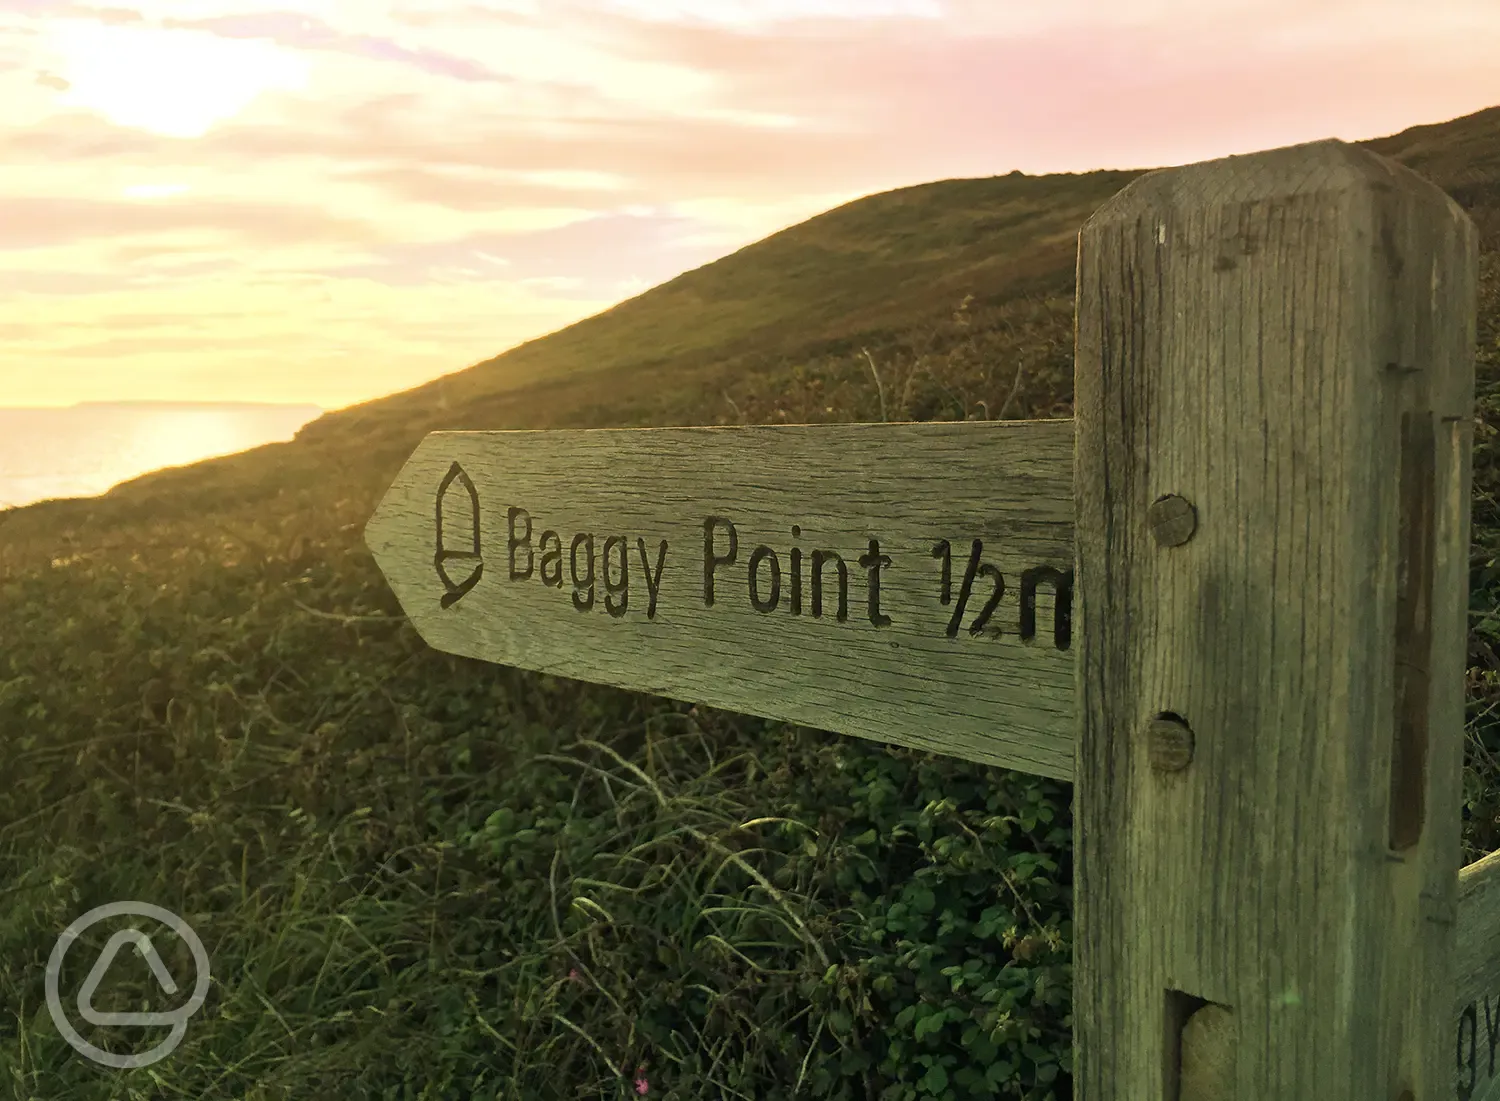 The National Trust' Baggy Point walk only minutes away